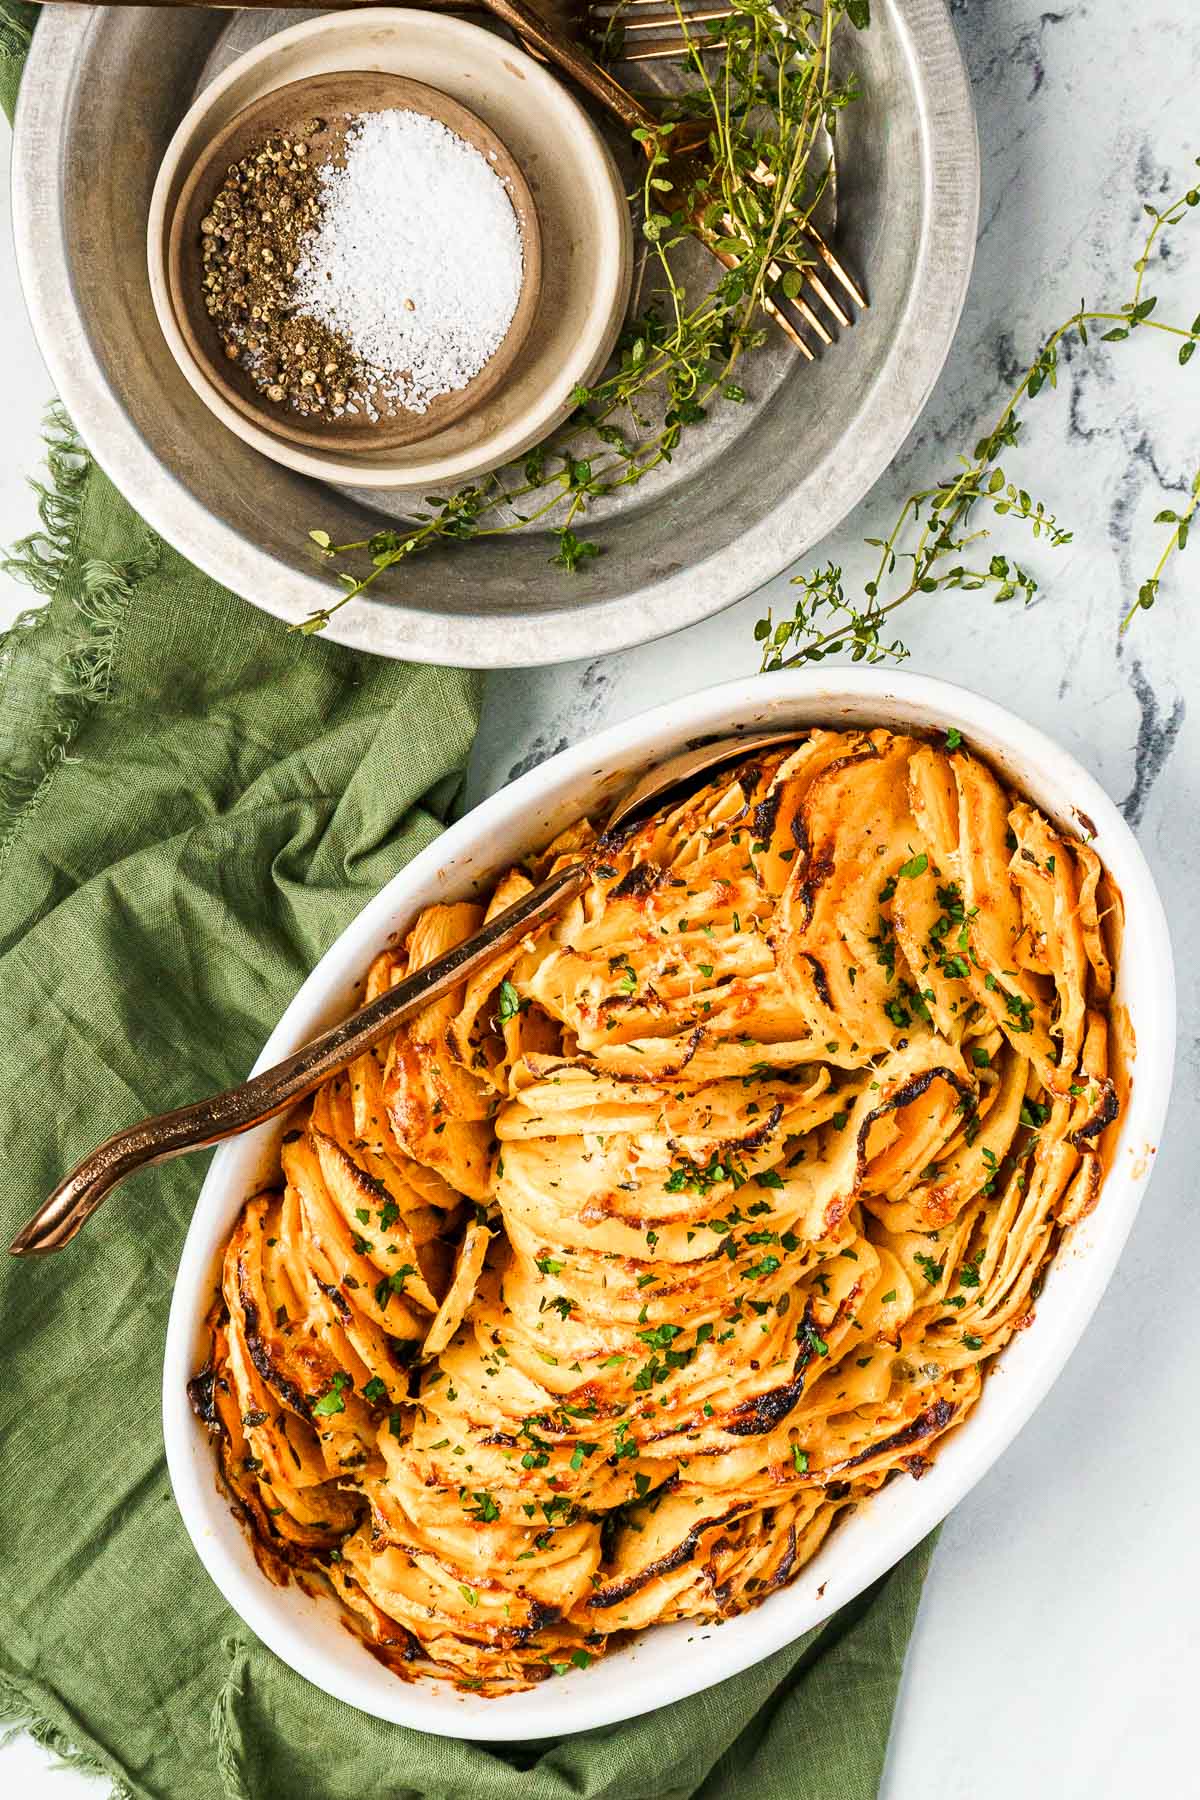 rutabaga slices in a baking dish with plates on the side